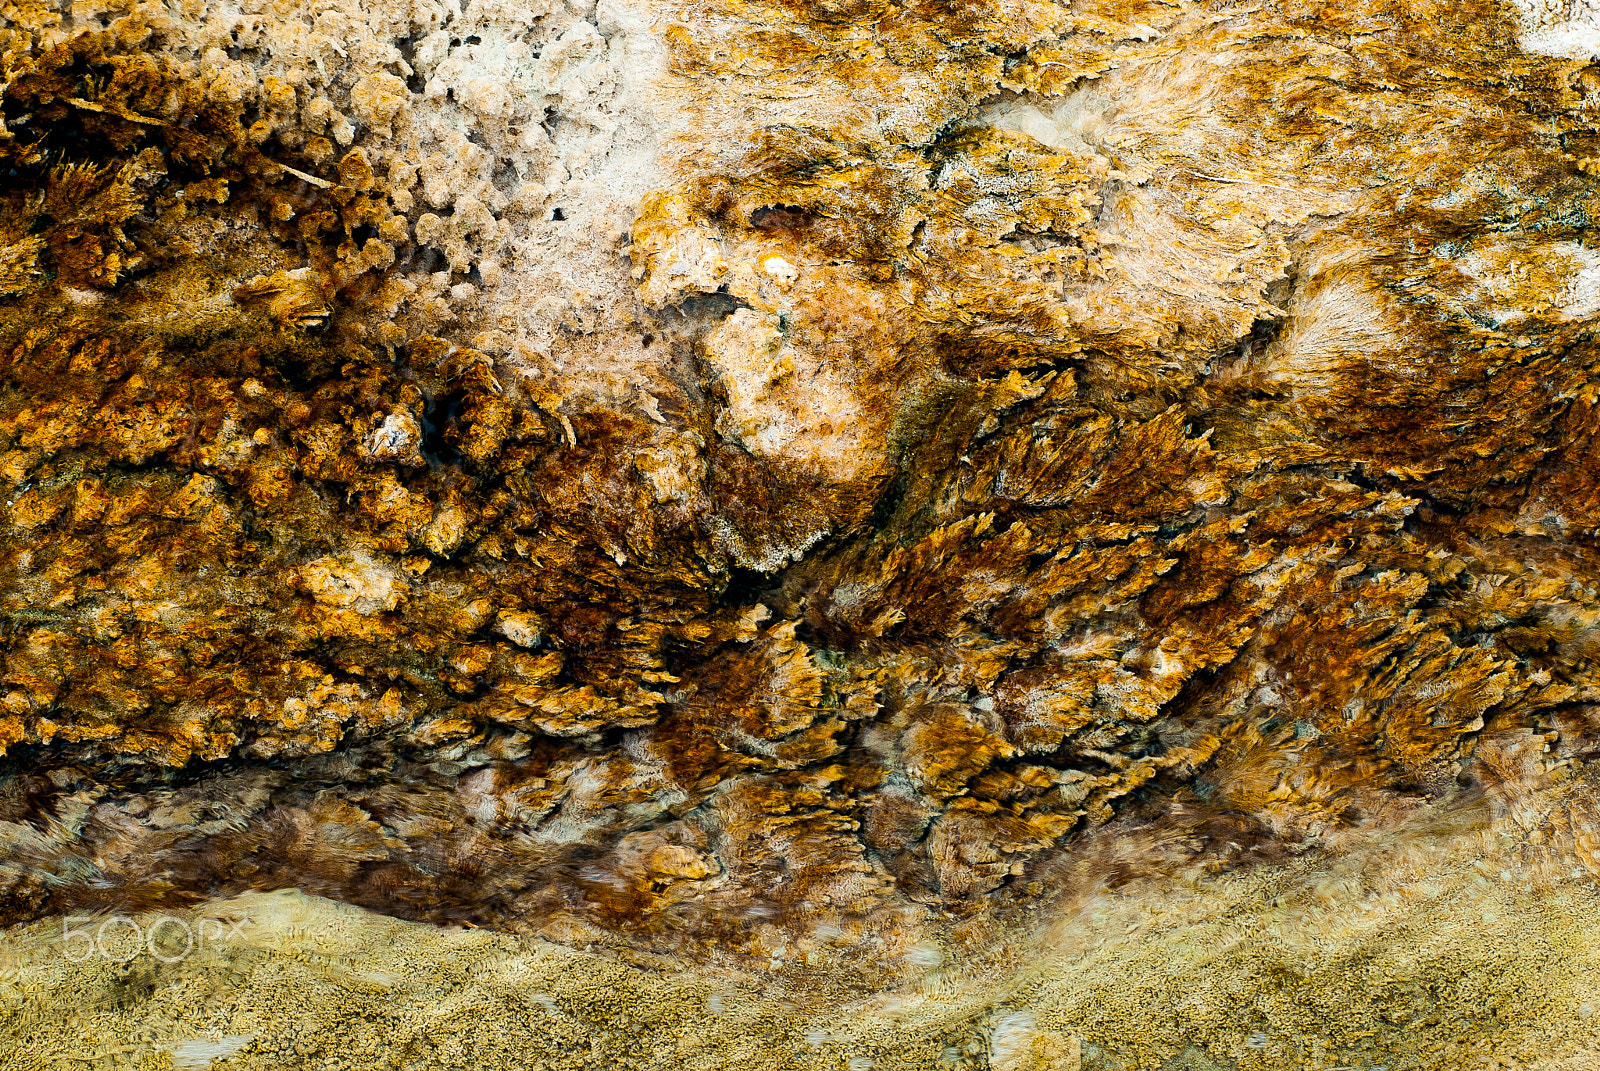 Nikon D200 + AF Zoom-Nikkor 80-200mm f/2.8 ED sample photo. Mammoth hot springs mineral deposition texture photography